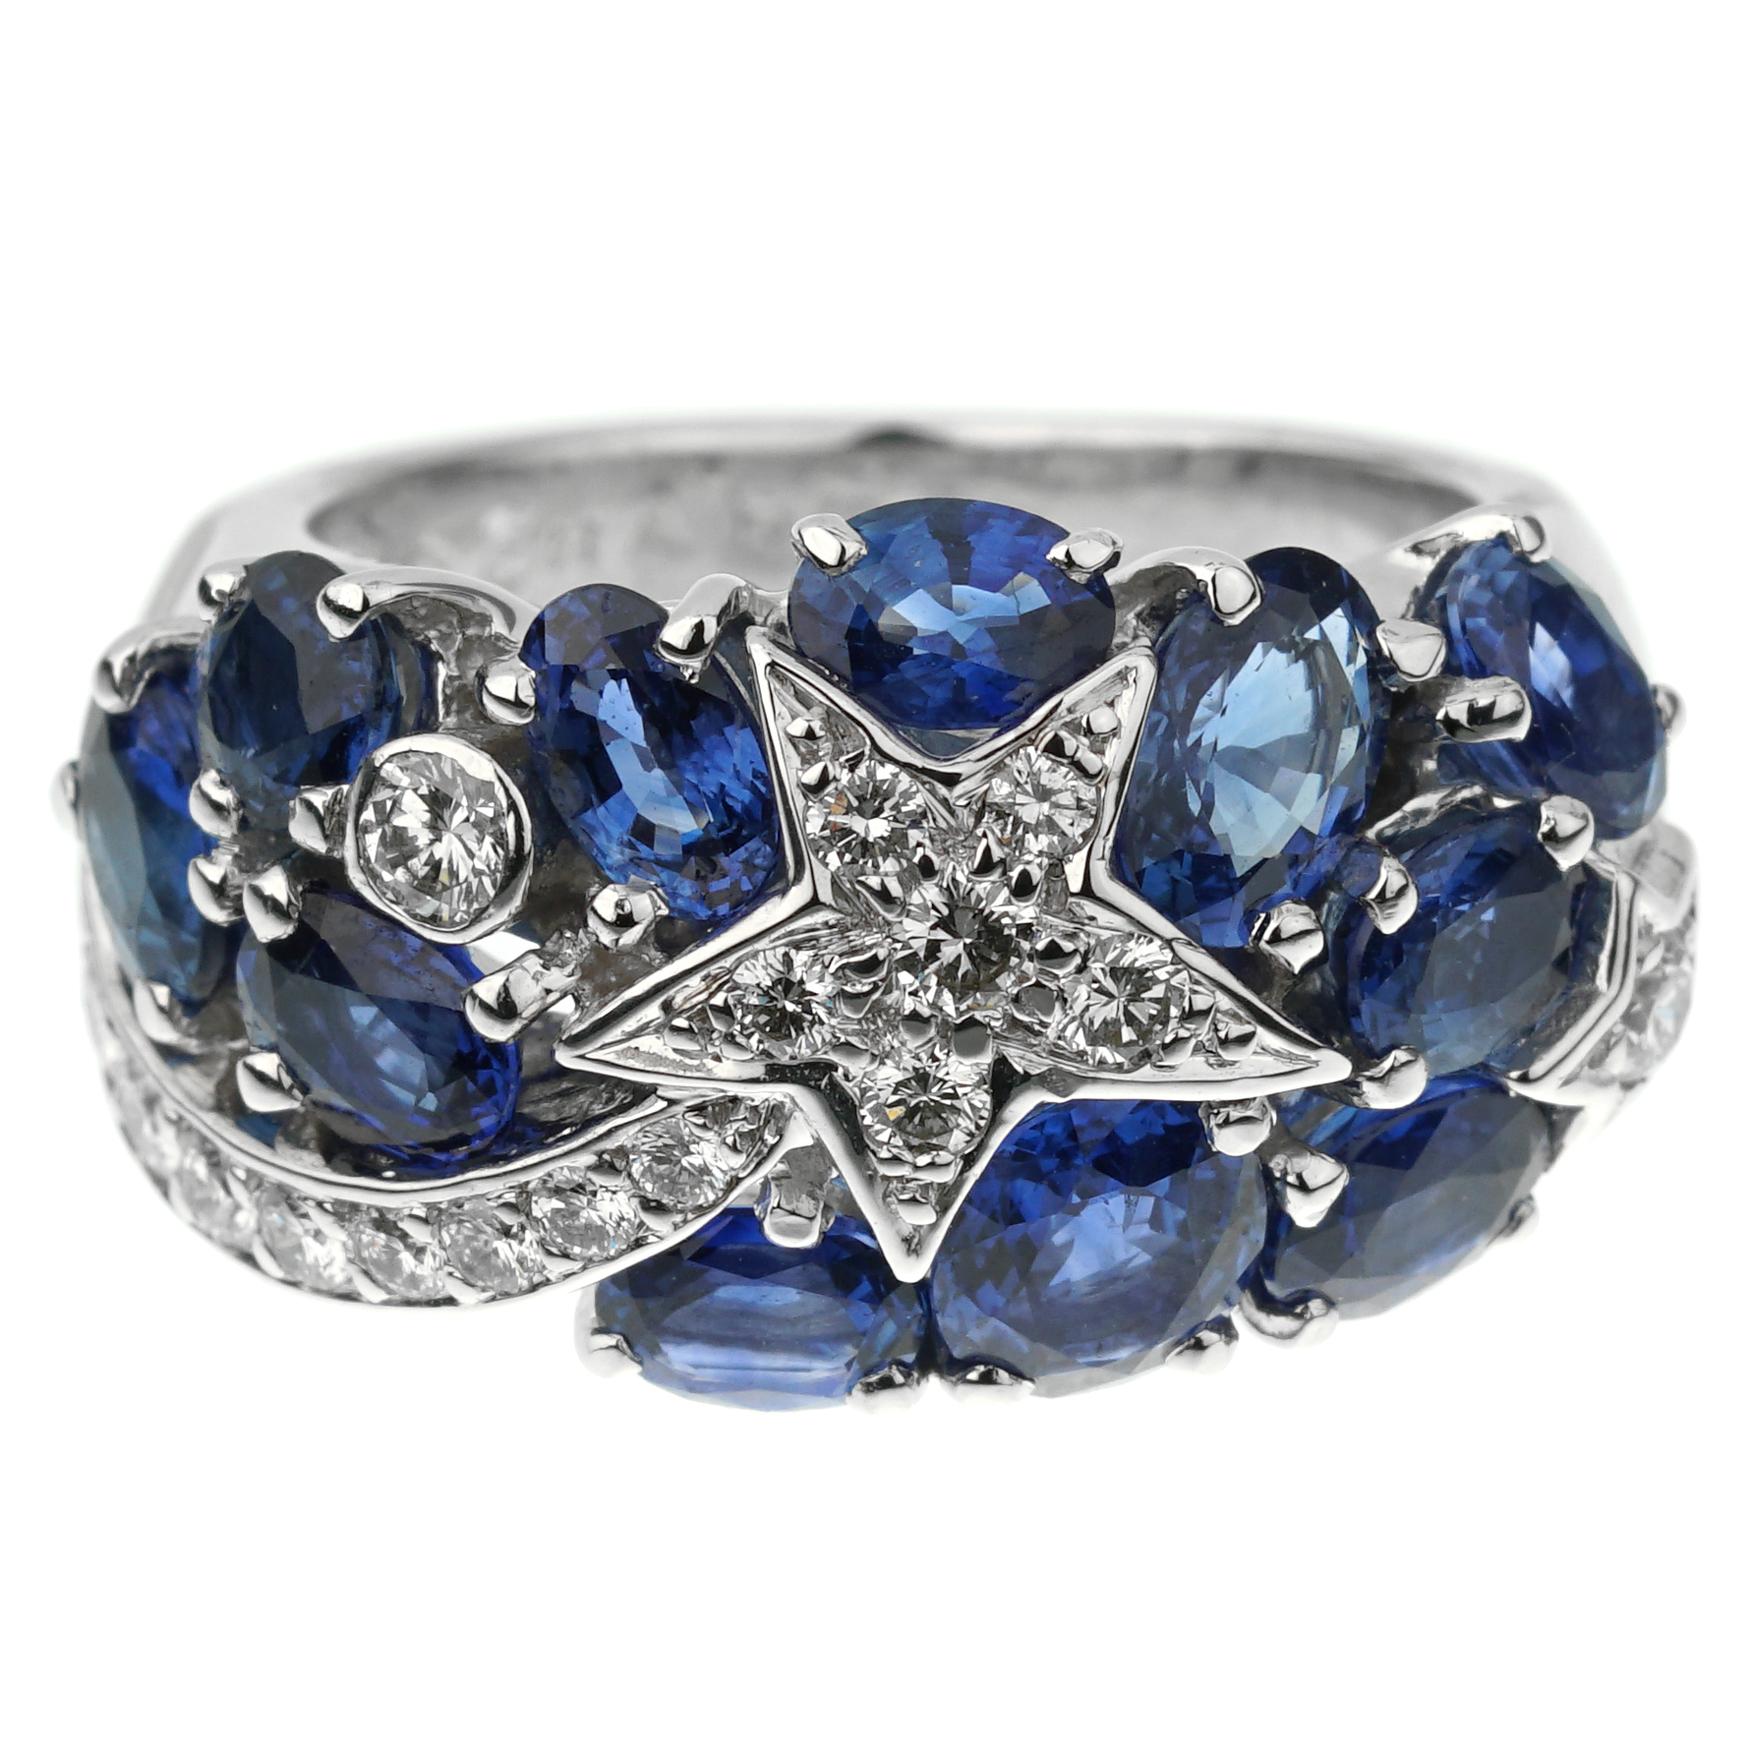 An iconic Chanel cocktail ring from the Comete collection showcasing deep blue sapphires and the iconic stars adorned with round brilliant cut diamonds in 18k white gold. The ring measures a size 5 3/4 and can be resized.